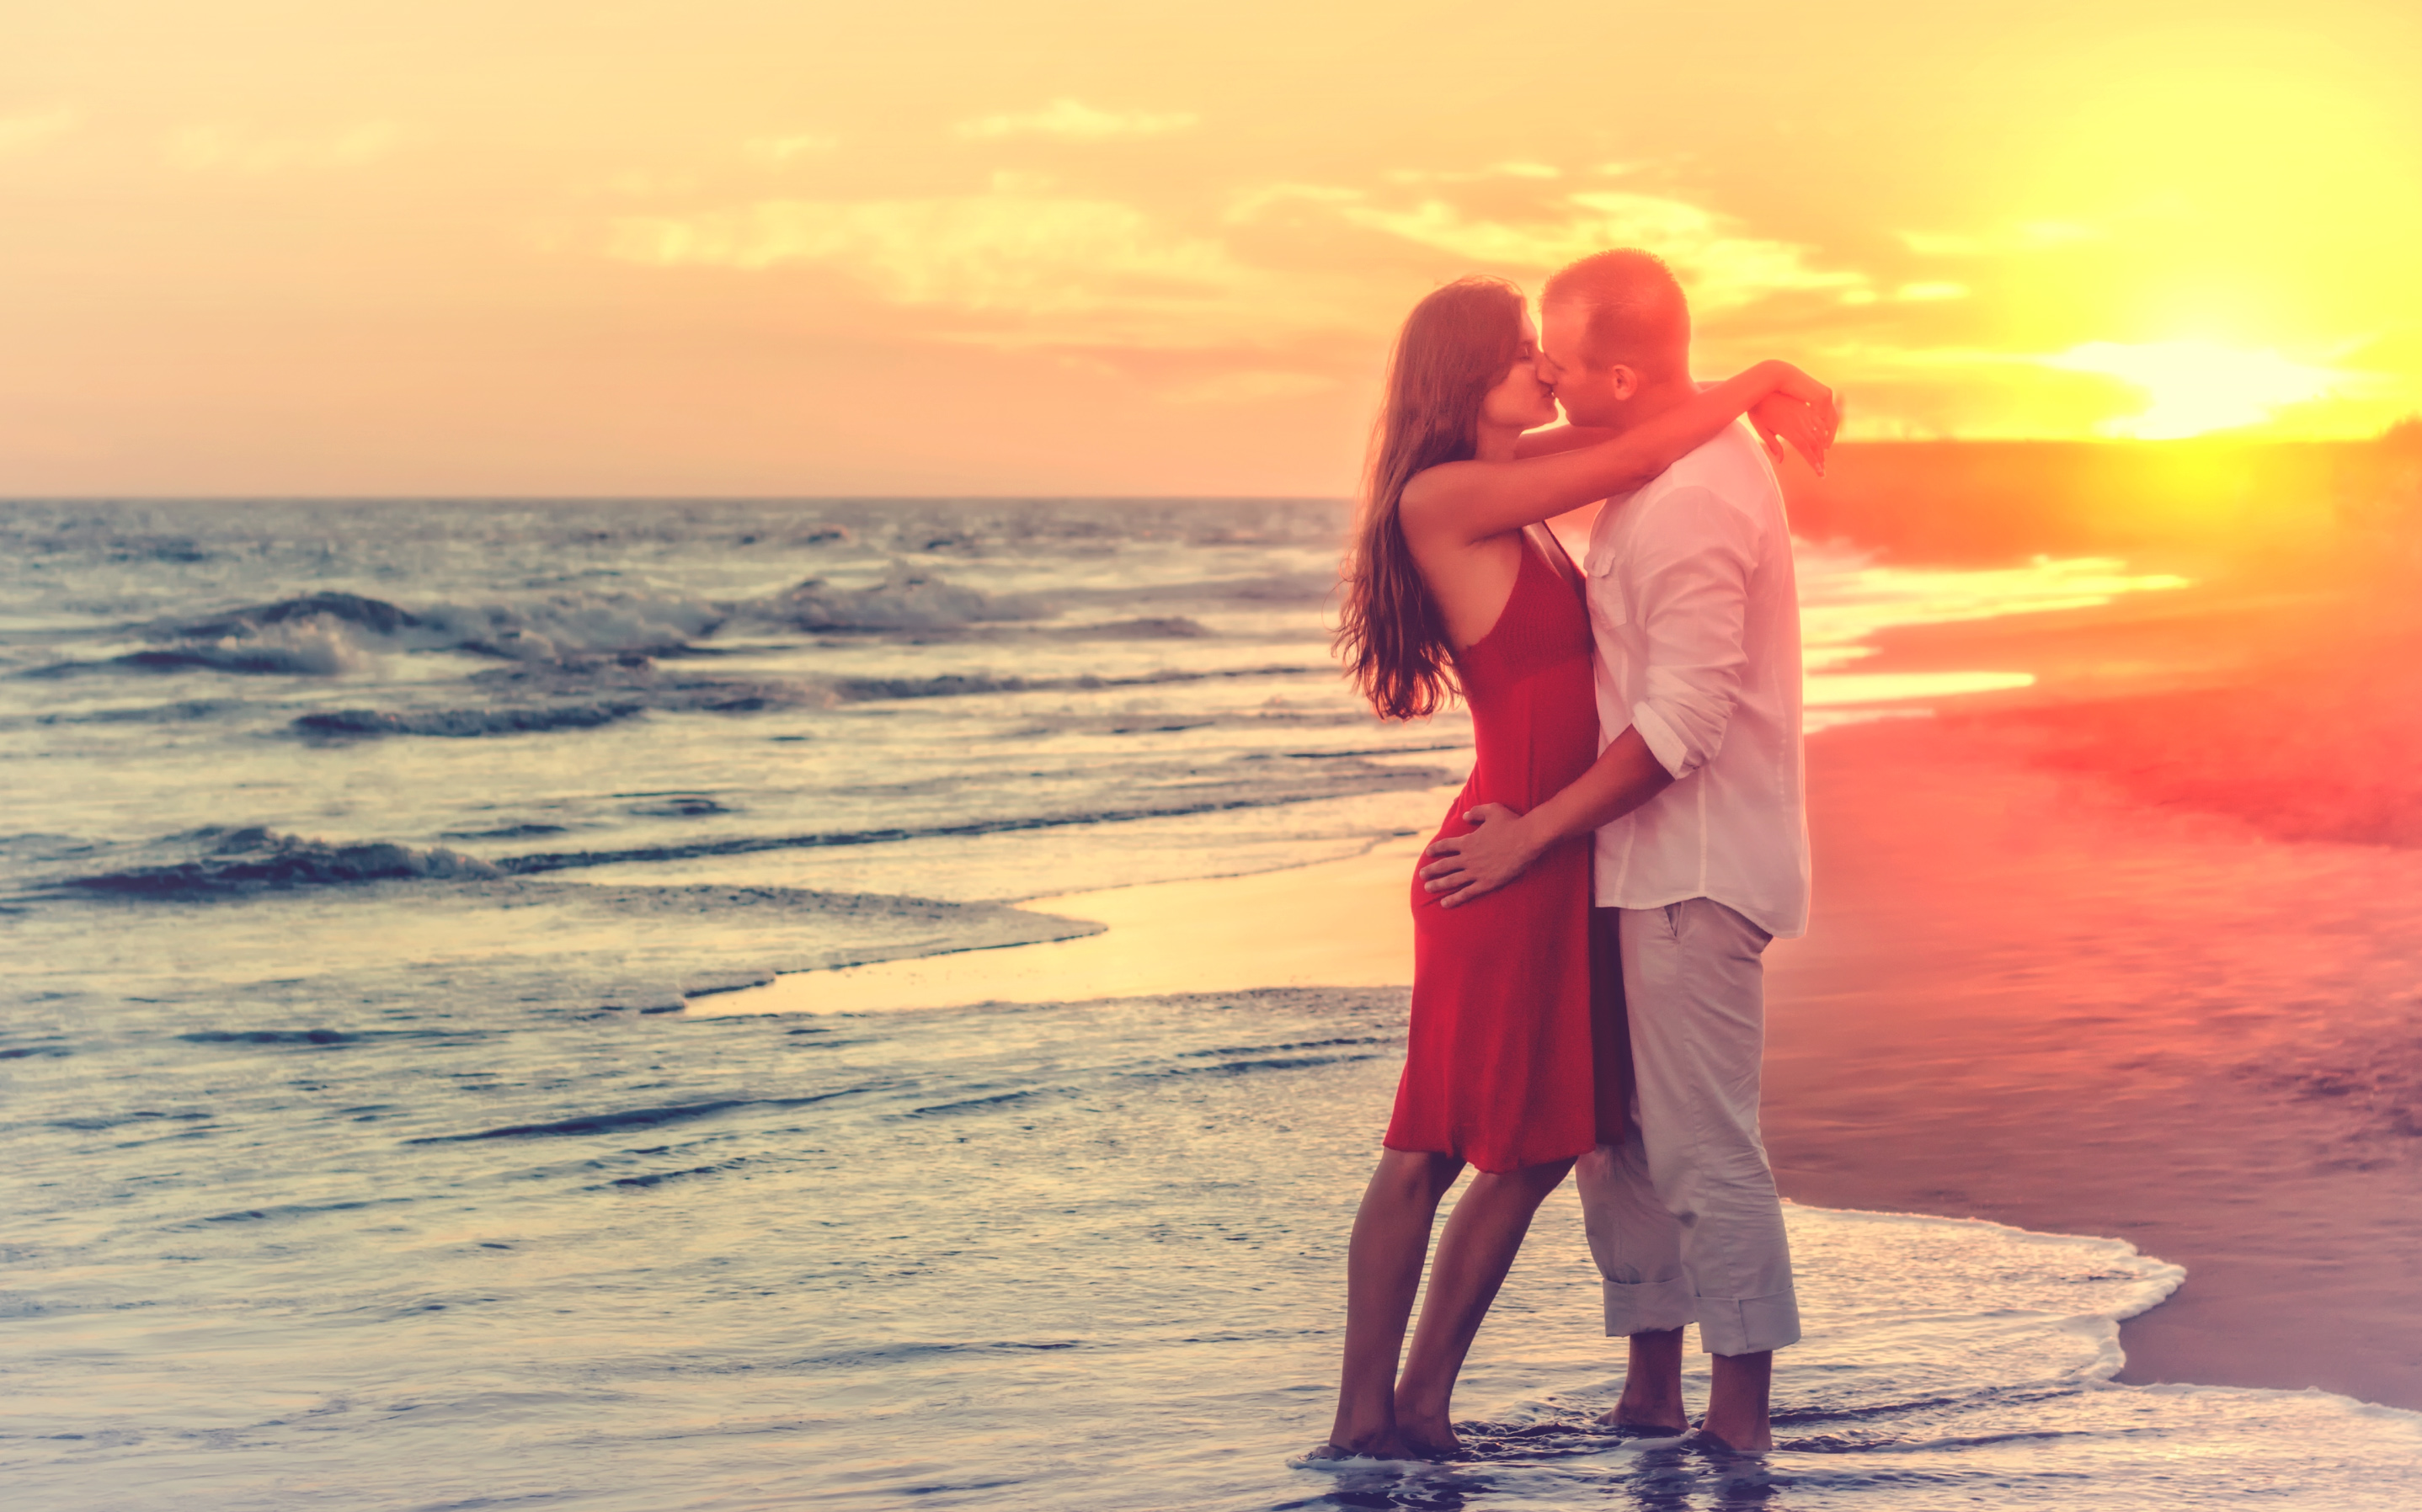 Hazy Looks - Romantic Couple at the Beach at Sunset, Affection, Romantic, Male, Man, HQ Photo